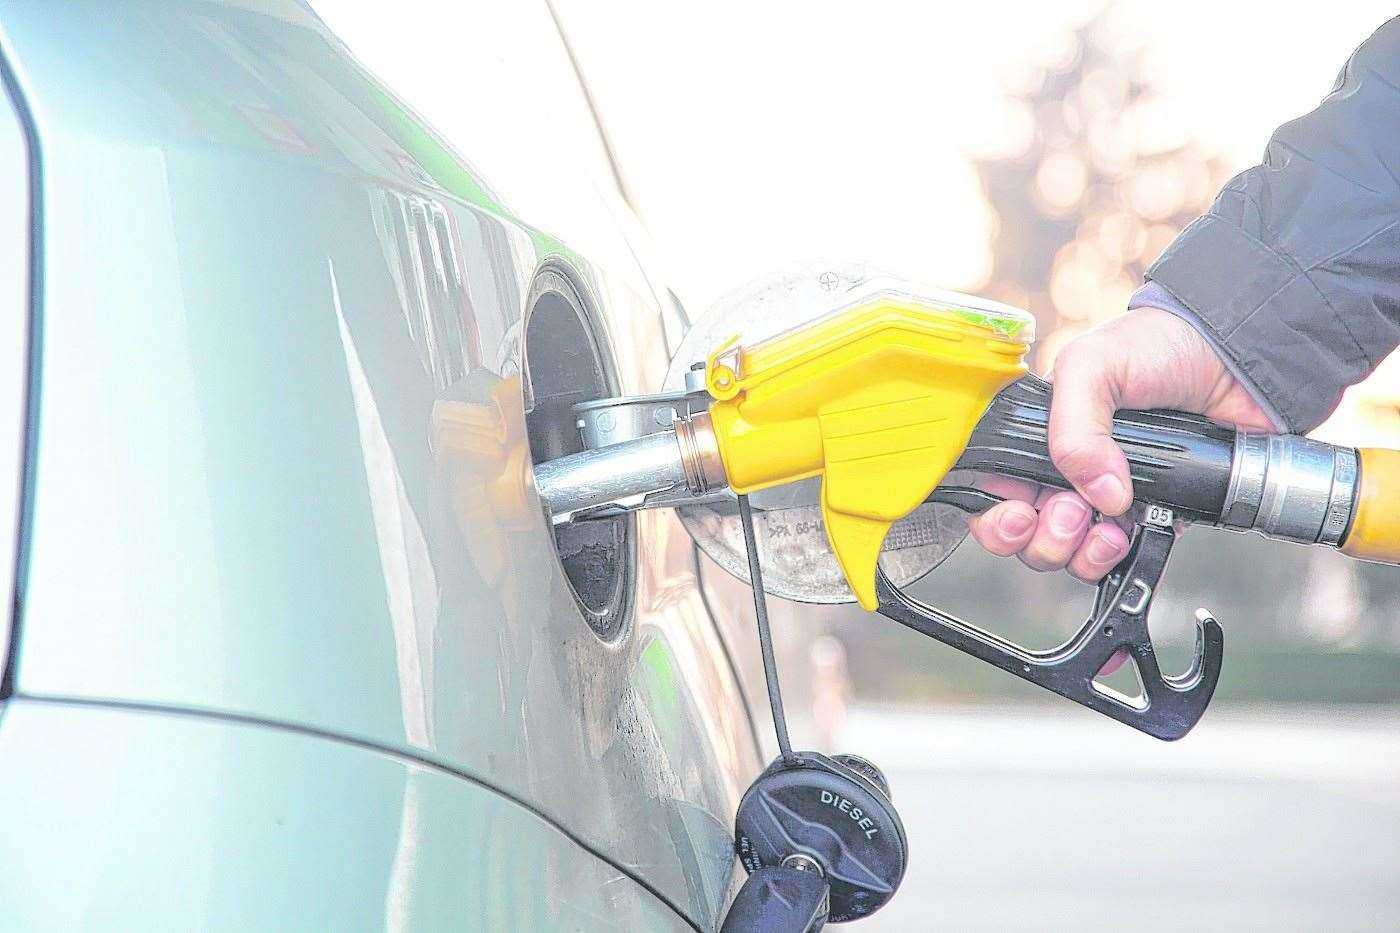 Petrol prices are continuing to rise, and are now the highest in eight months